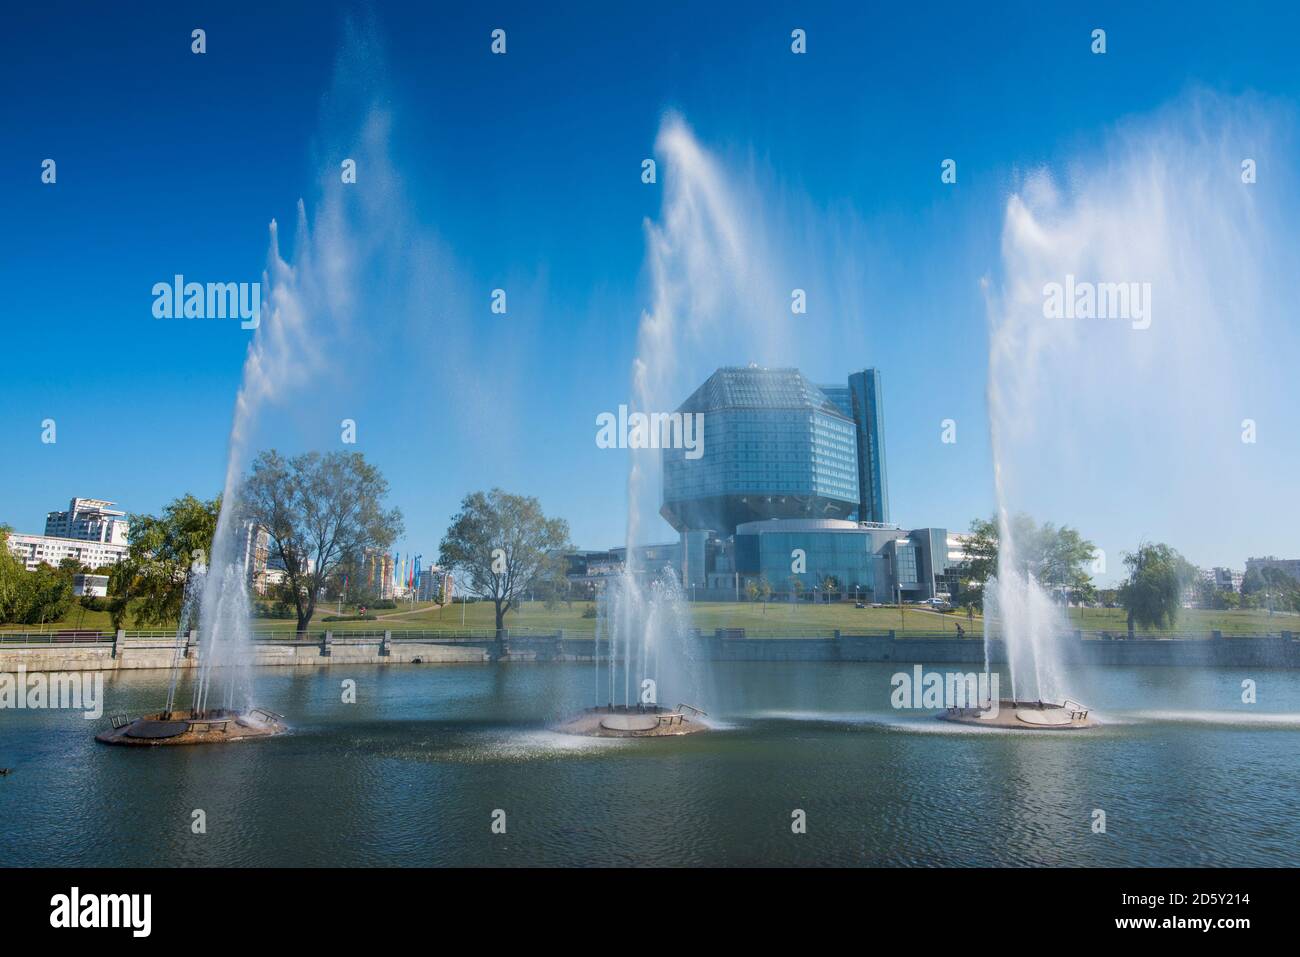 Belarus, Minsk, view to National library with fountains in the foreground Stock Photo